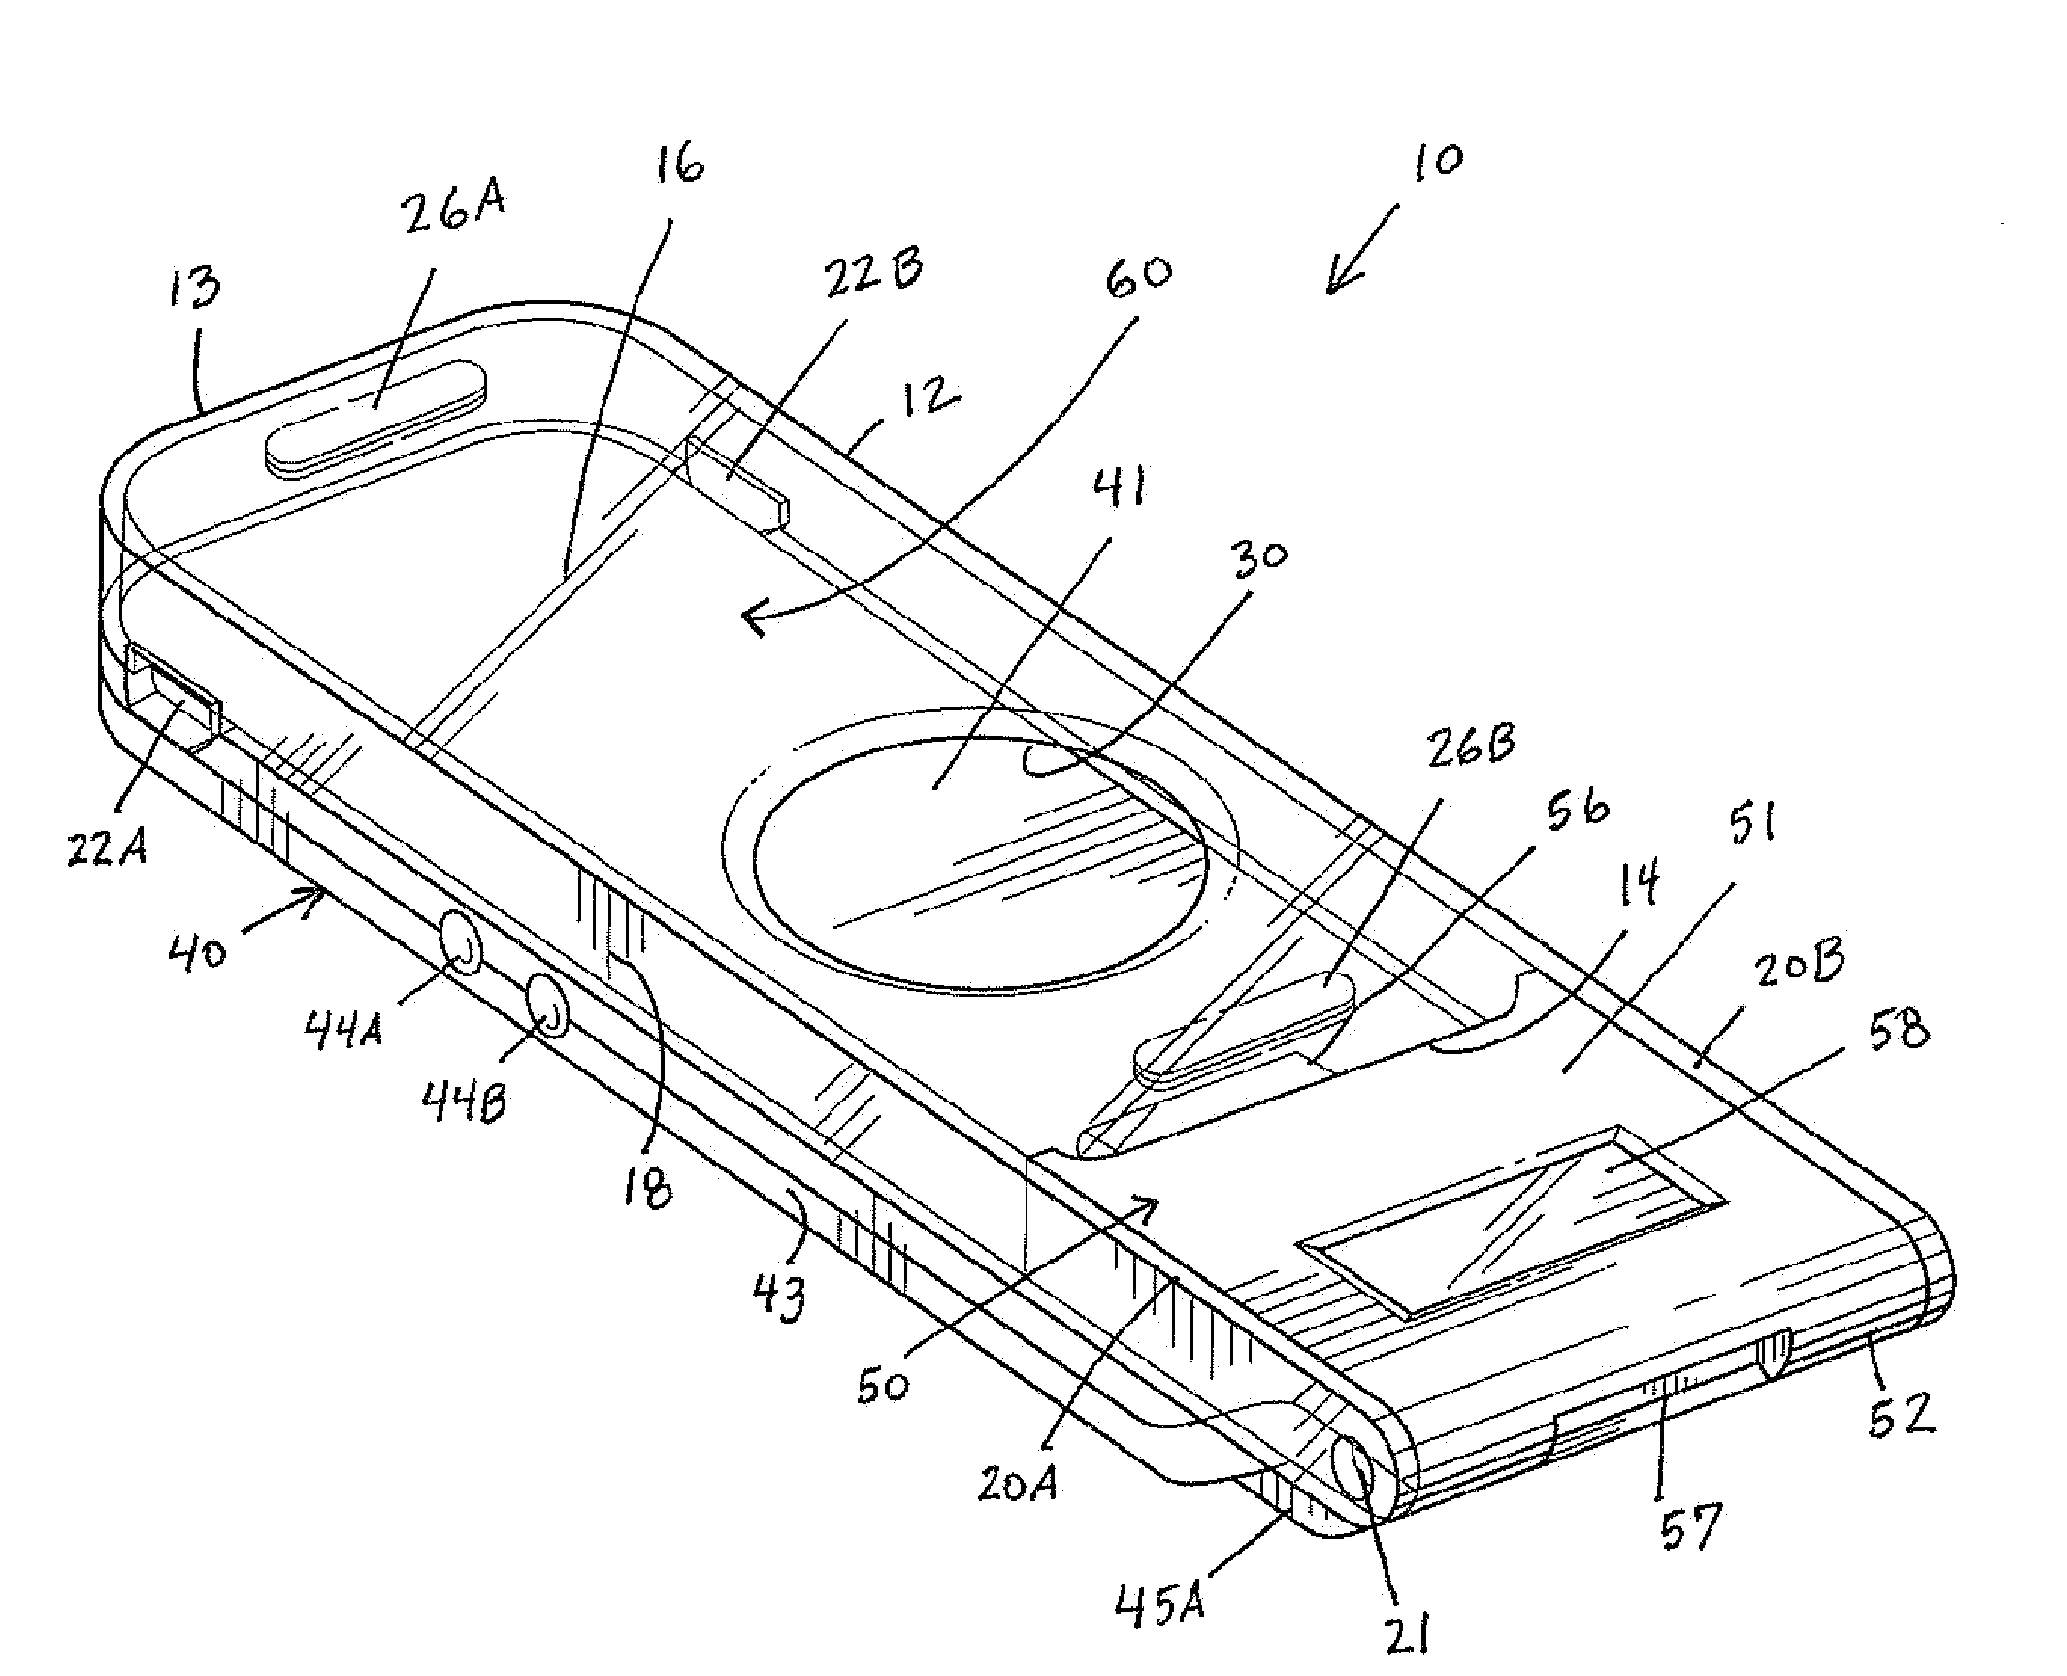 Protective assembly for portable digital device